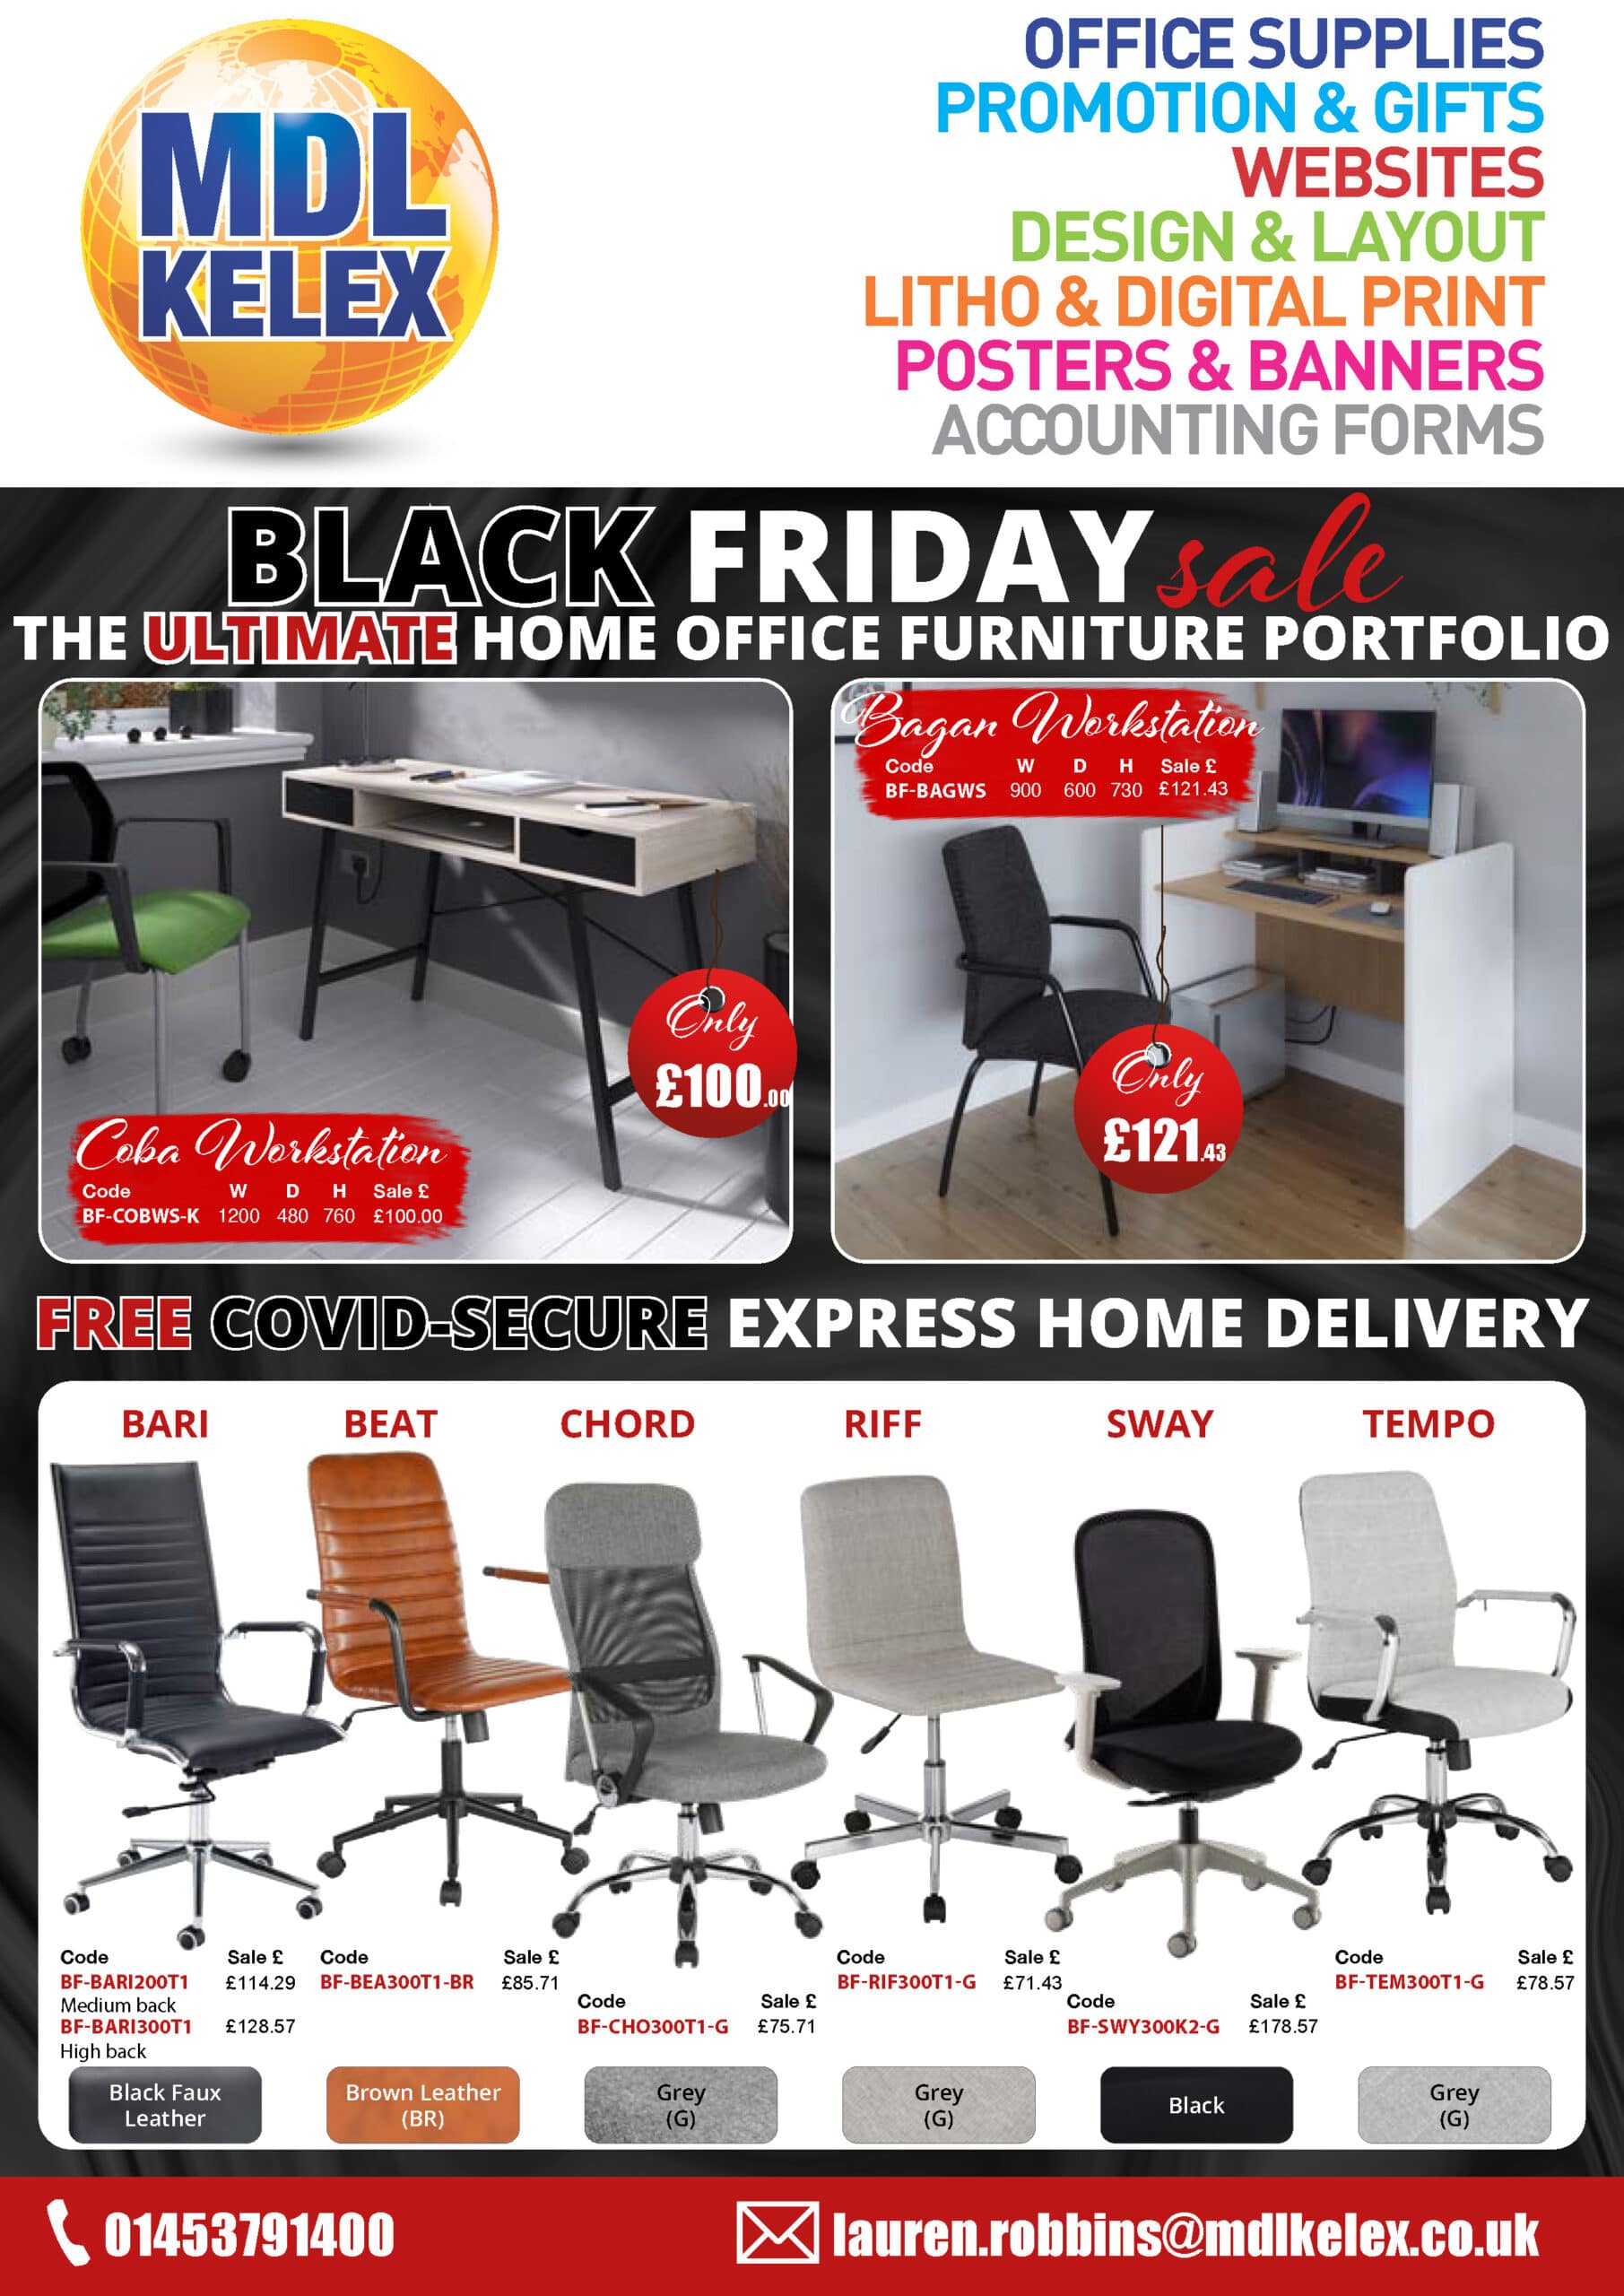 Black Friday Furniture Promotions MDL Kelex Printing Services